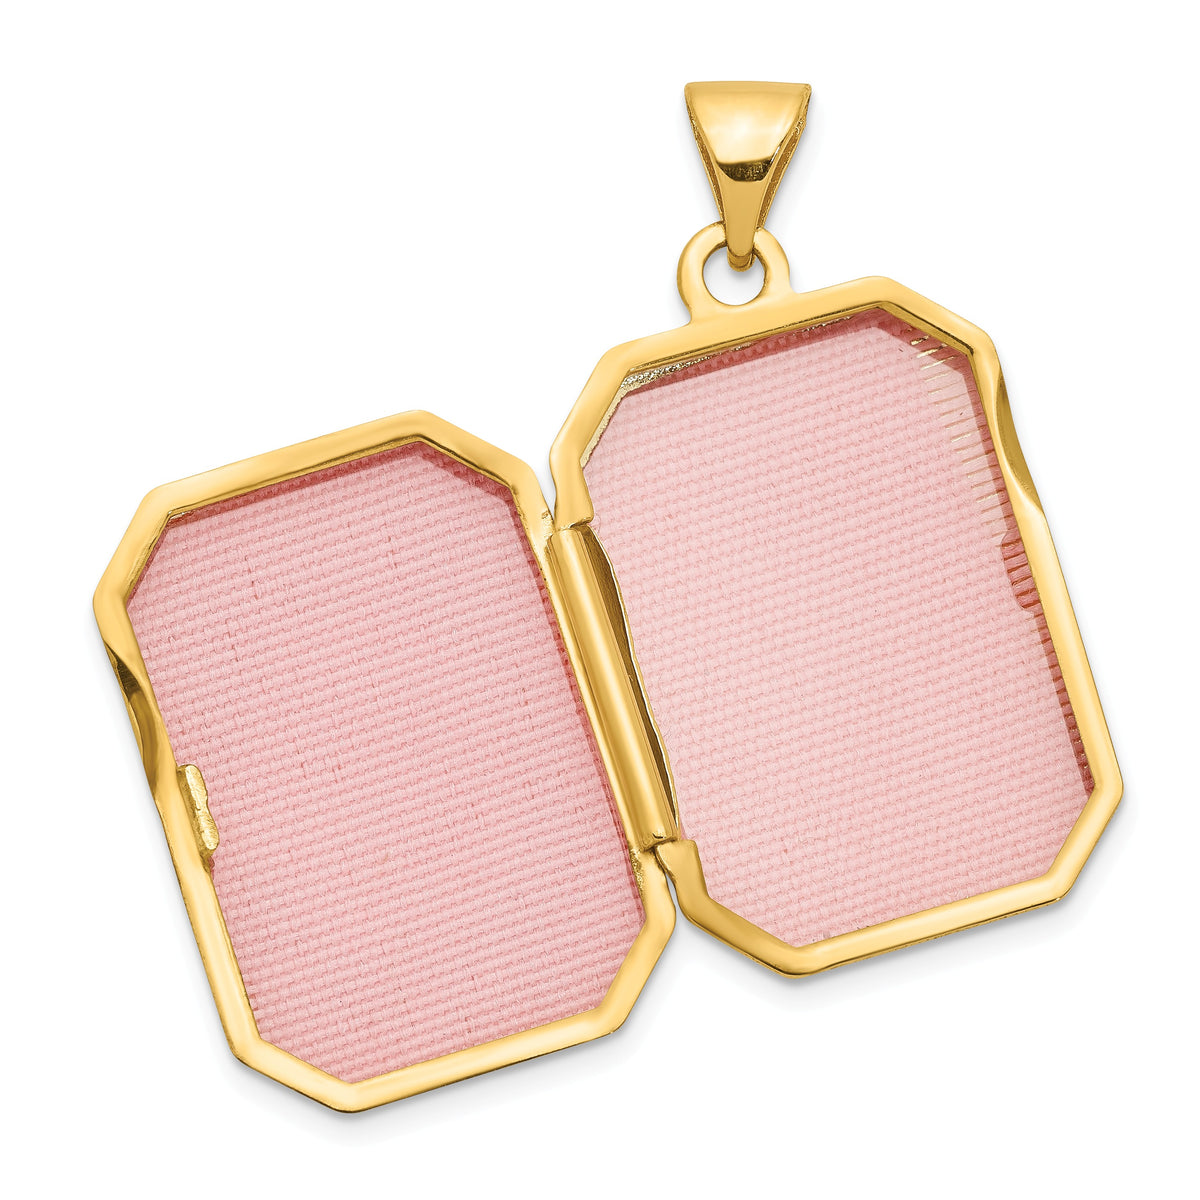 Alternate view of the 14k Yellow Gold 20mm Scrolled Border Octagonal Locket by The Black Bow Jewelry Co.